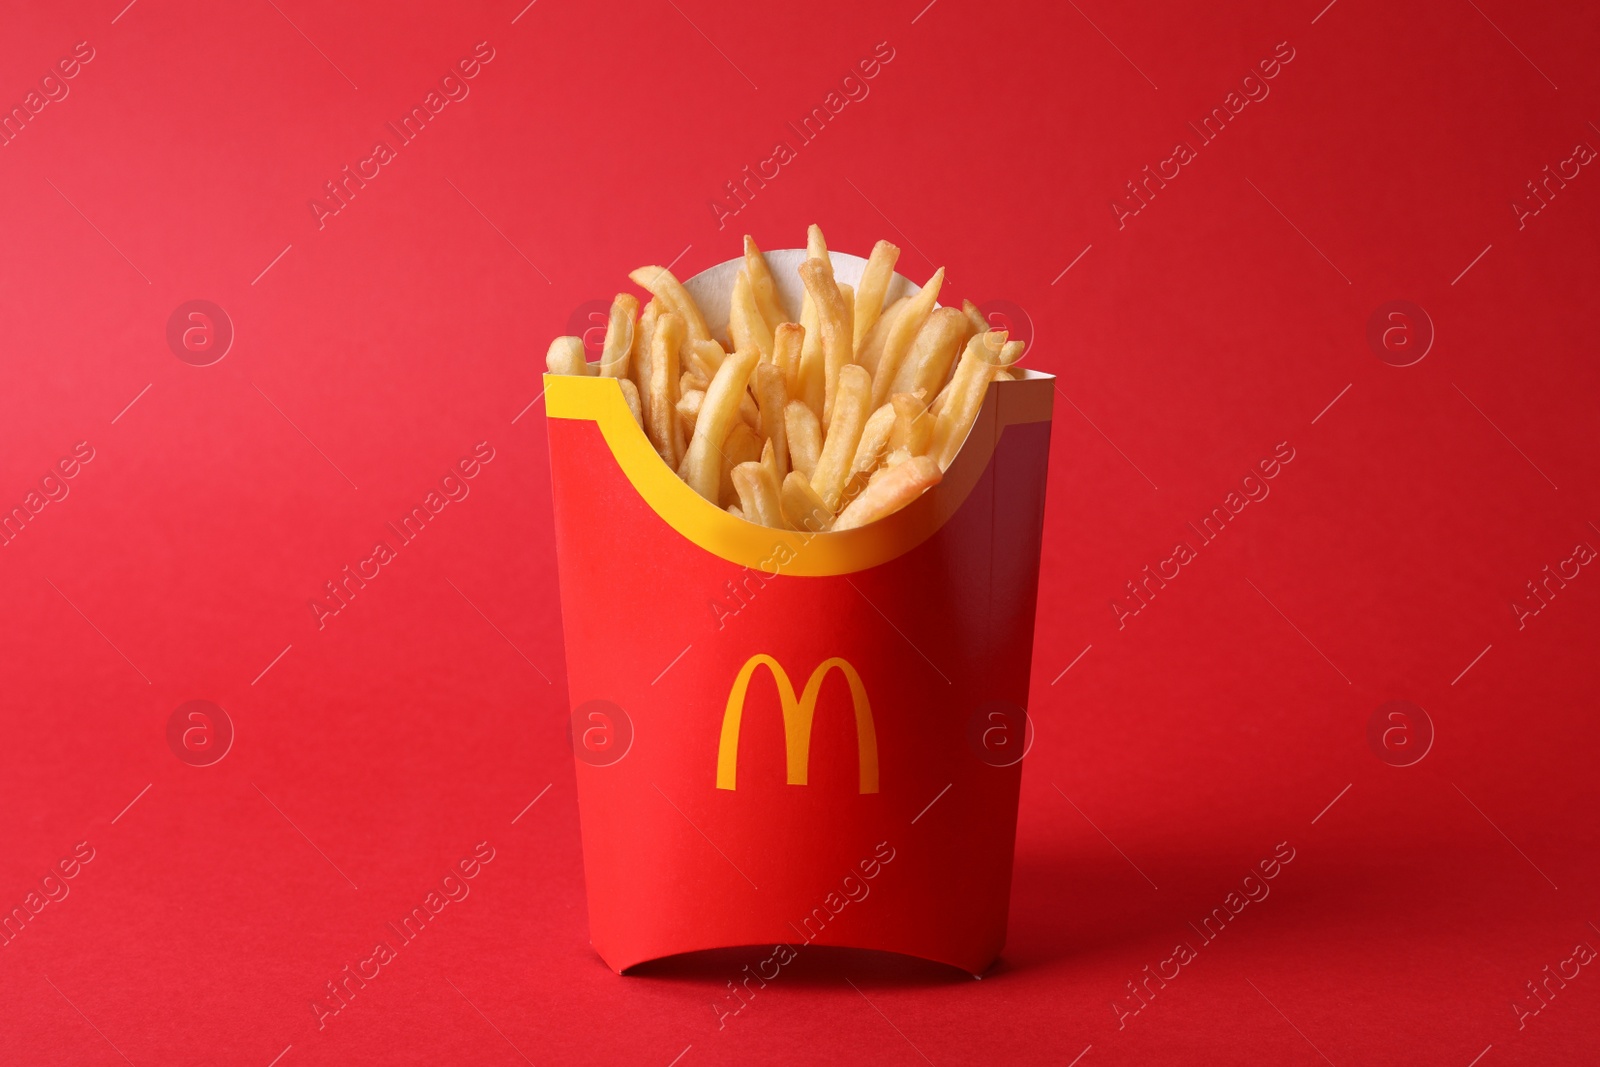 Photo of MYKOLAIV, UKRAINE - AUGUST 12, 2021: Big portion of McDonald's French fries on red background